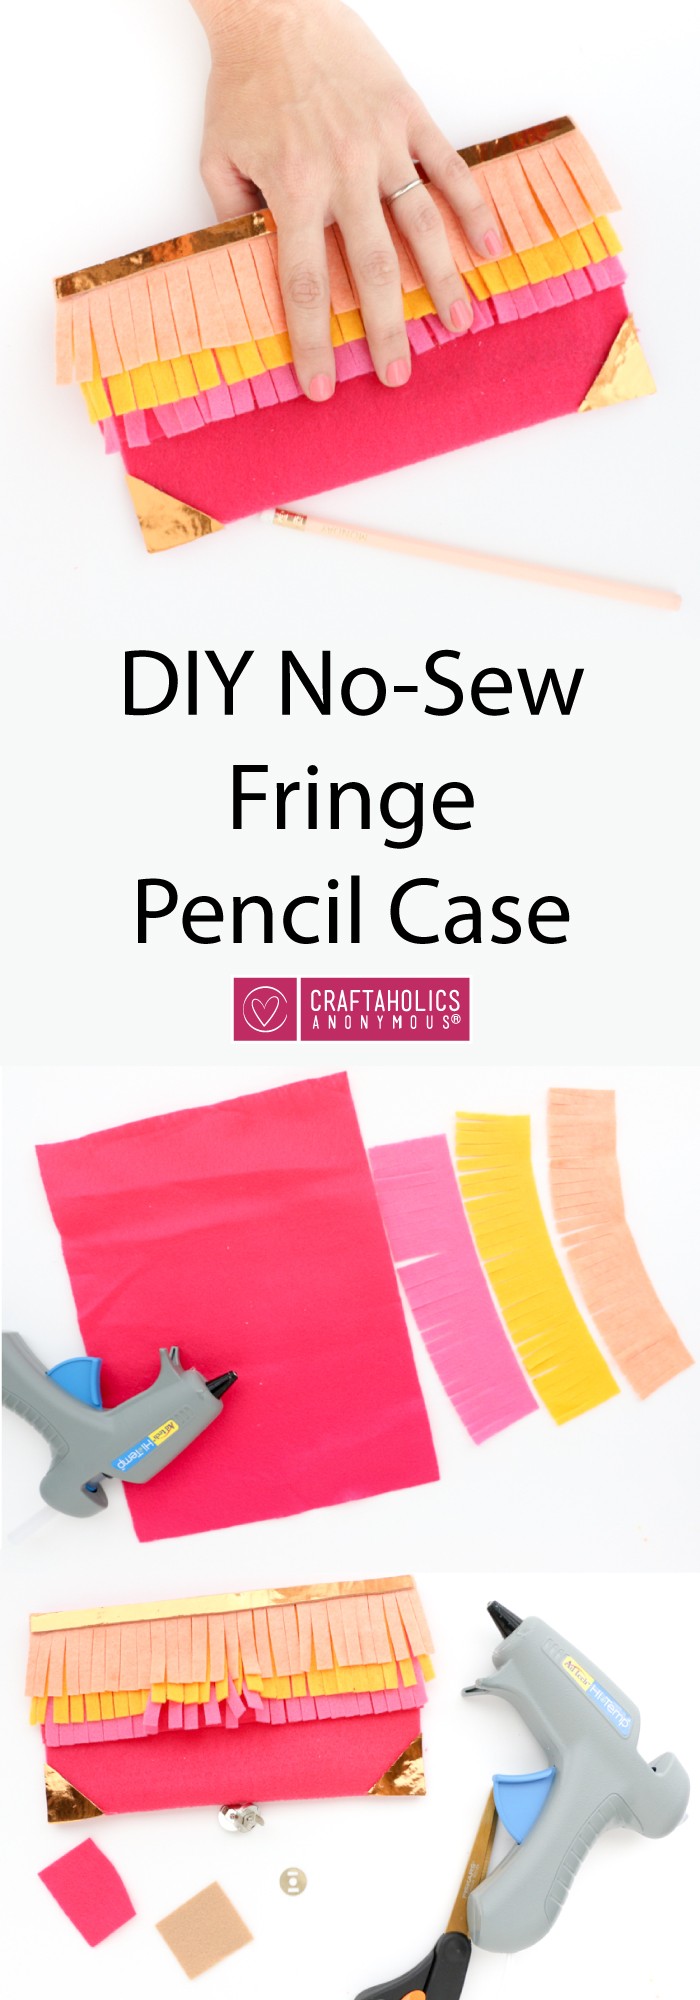 New-Sew Fringed Pencil Case! Easy back to school project at craftaholicsanonymous.net